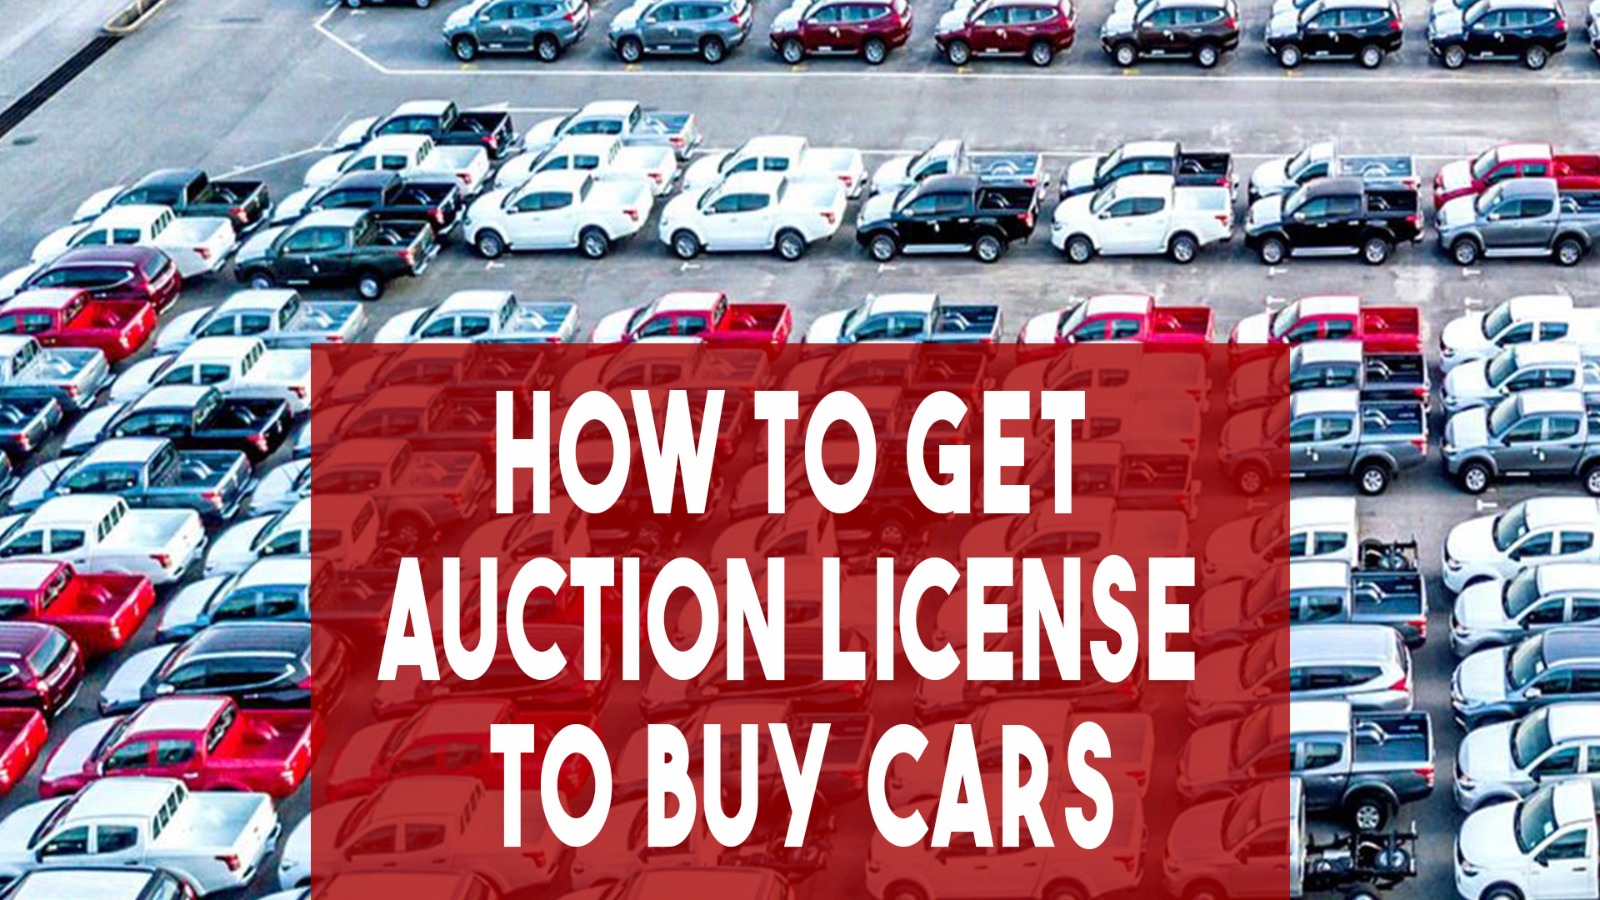 How To Get Auction License To Buy Cars?